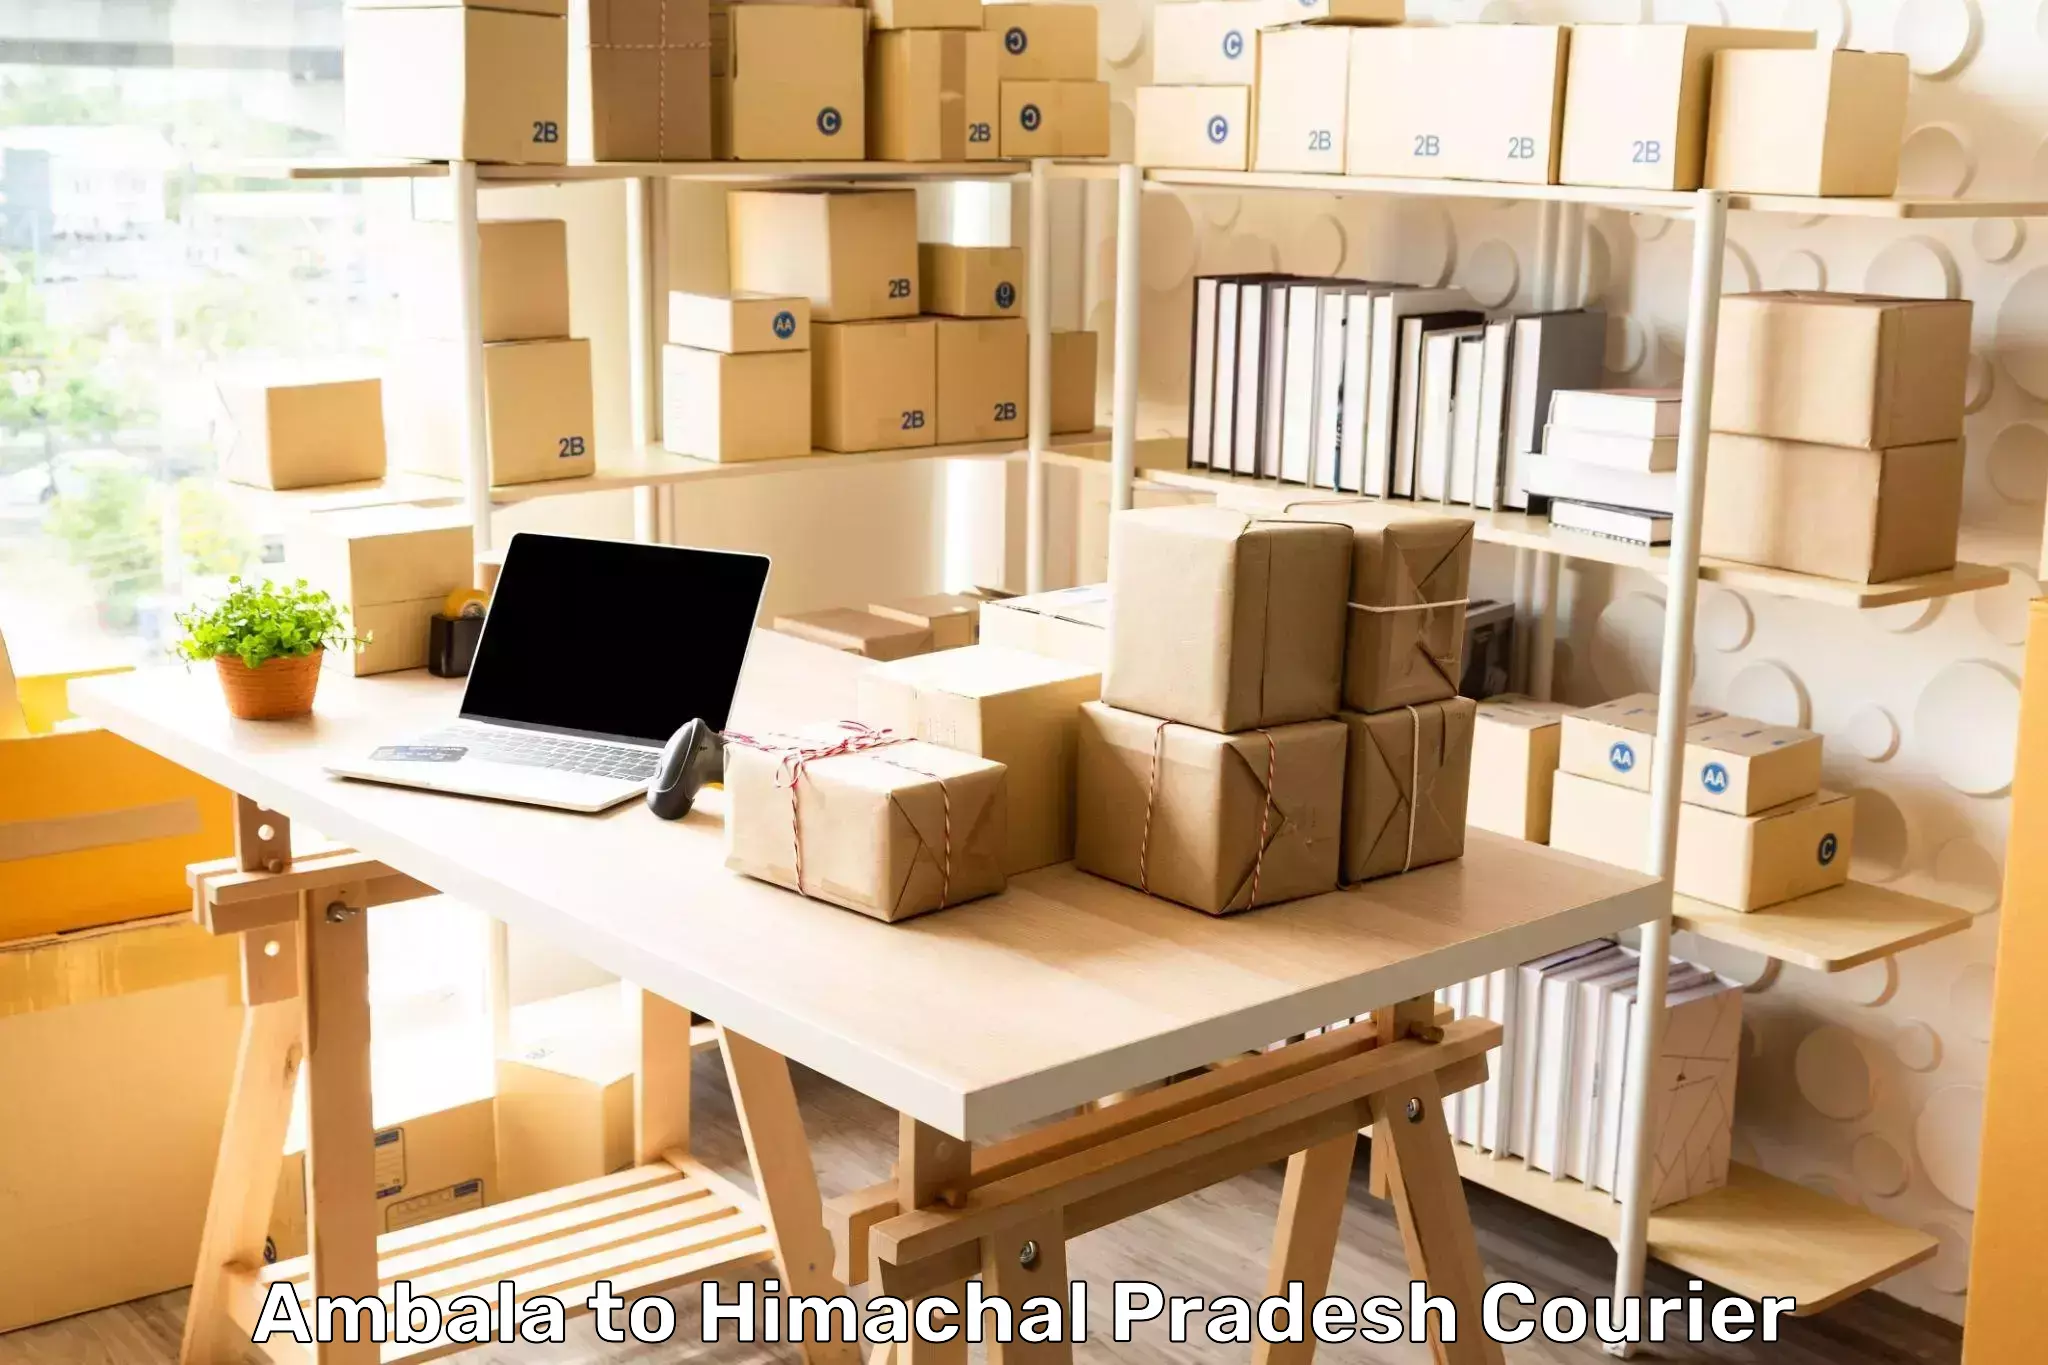 Cost-effective courier options Ambala to Himachal Pradesh